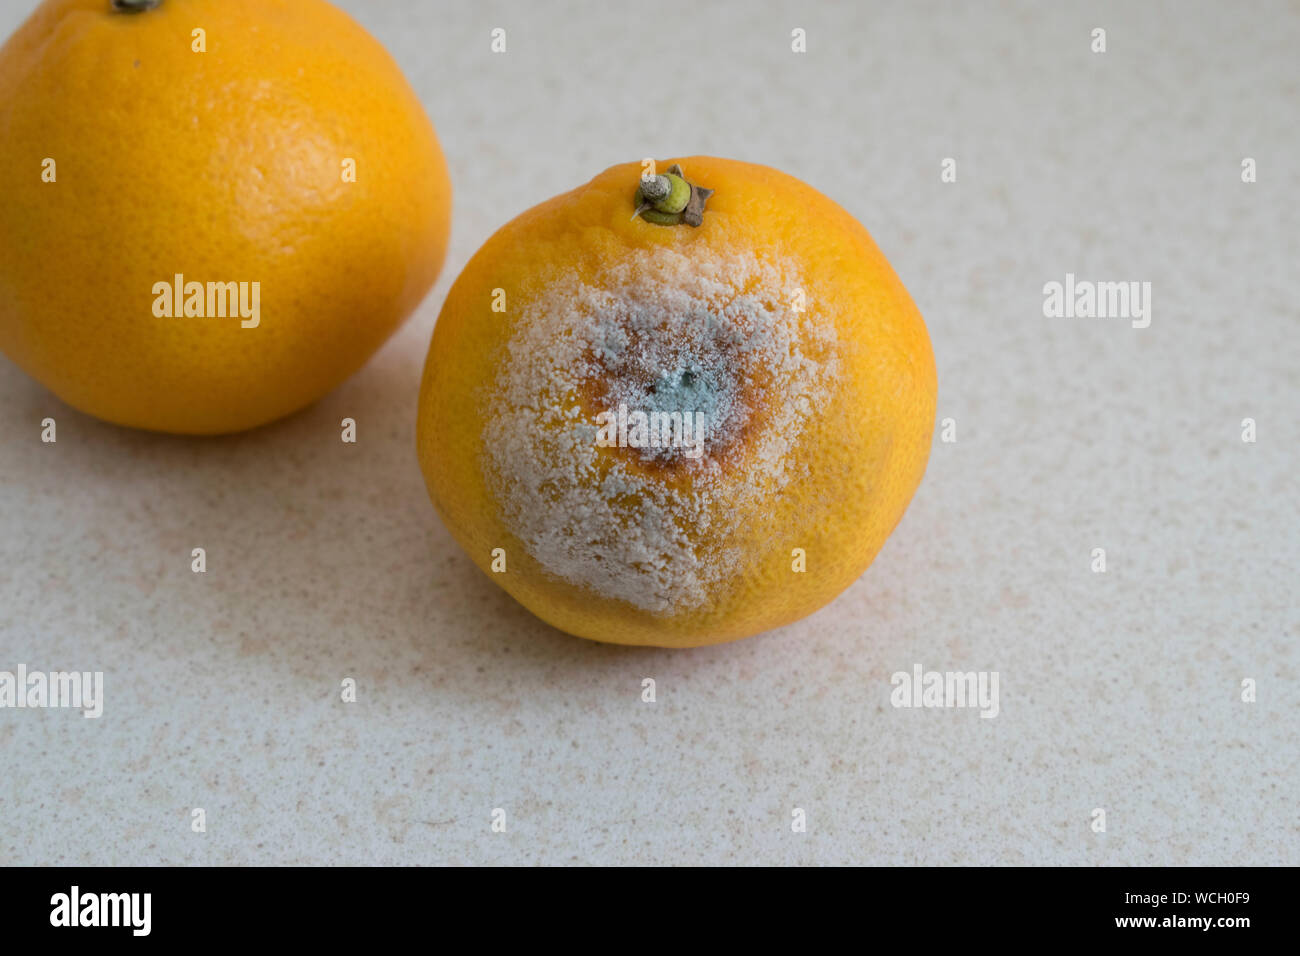 Mouldy fruit in a bowl Stock Photo